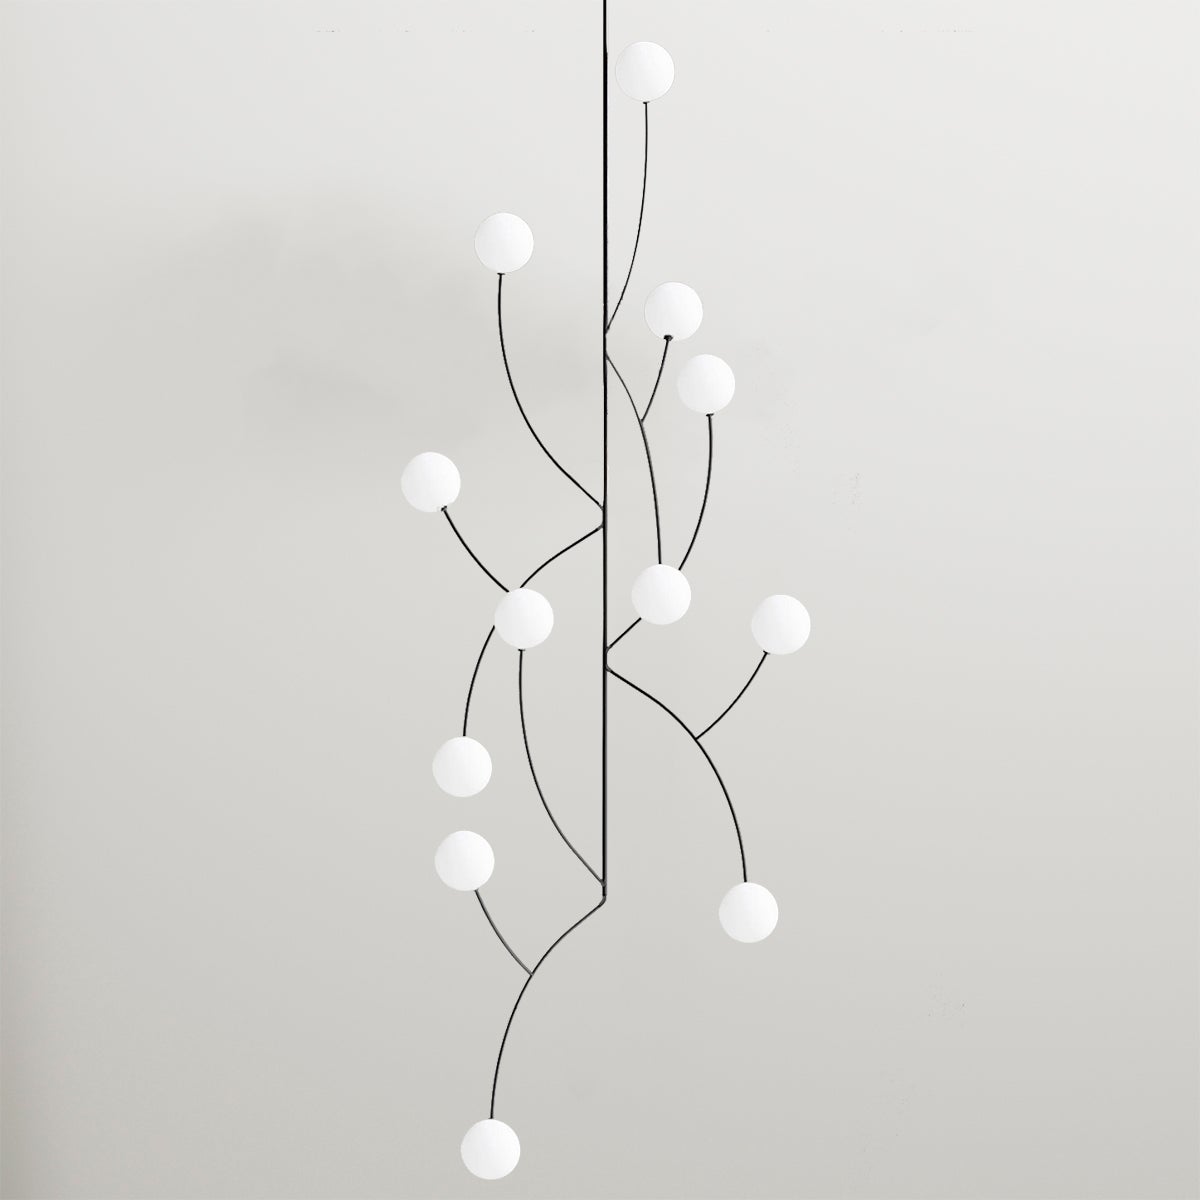  Minimalist Collectible Bespoke Pendant Chandelier with Multiple Opaque Spheres For Sale